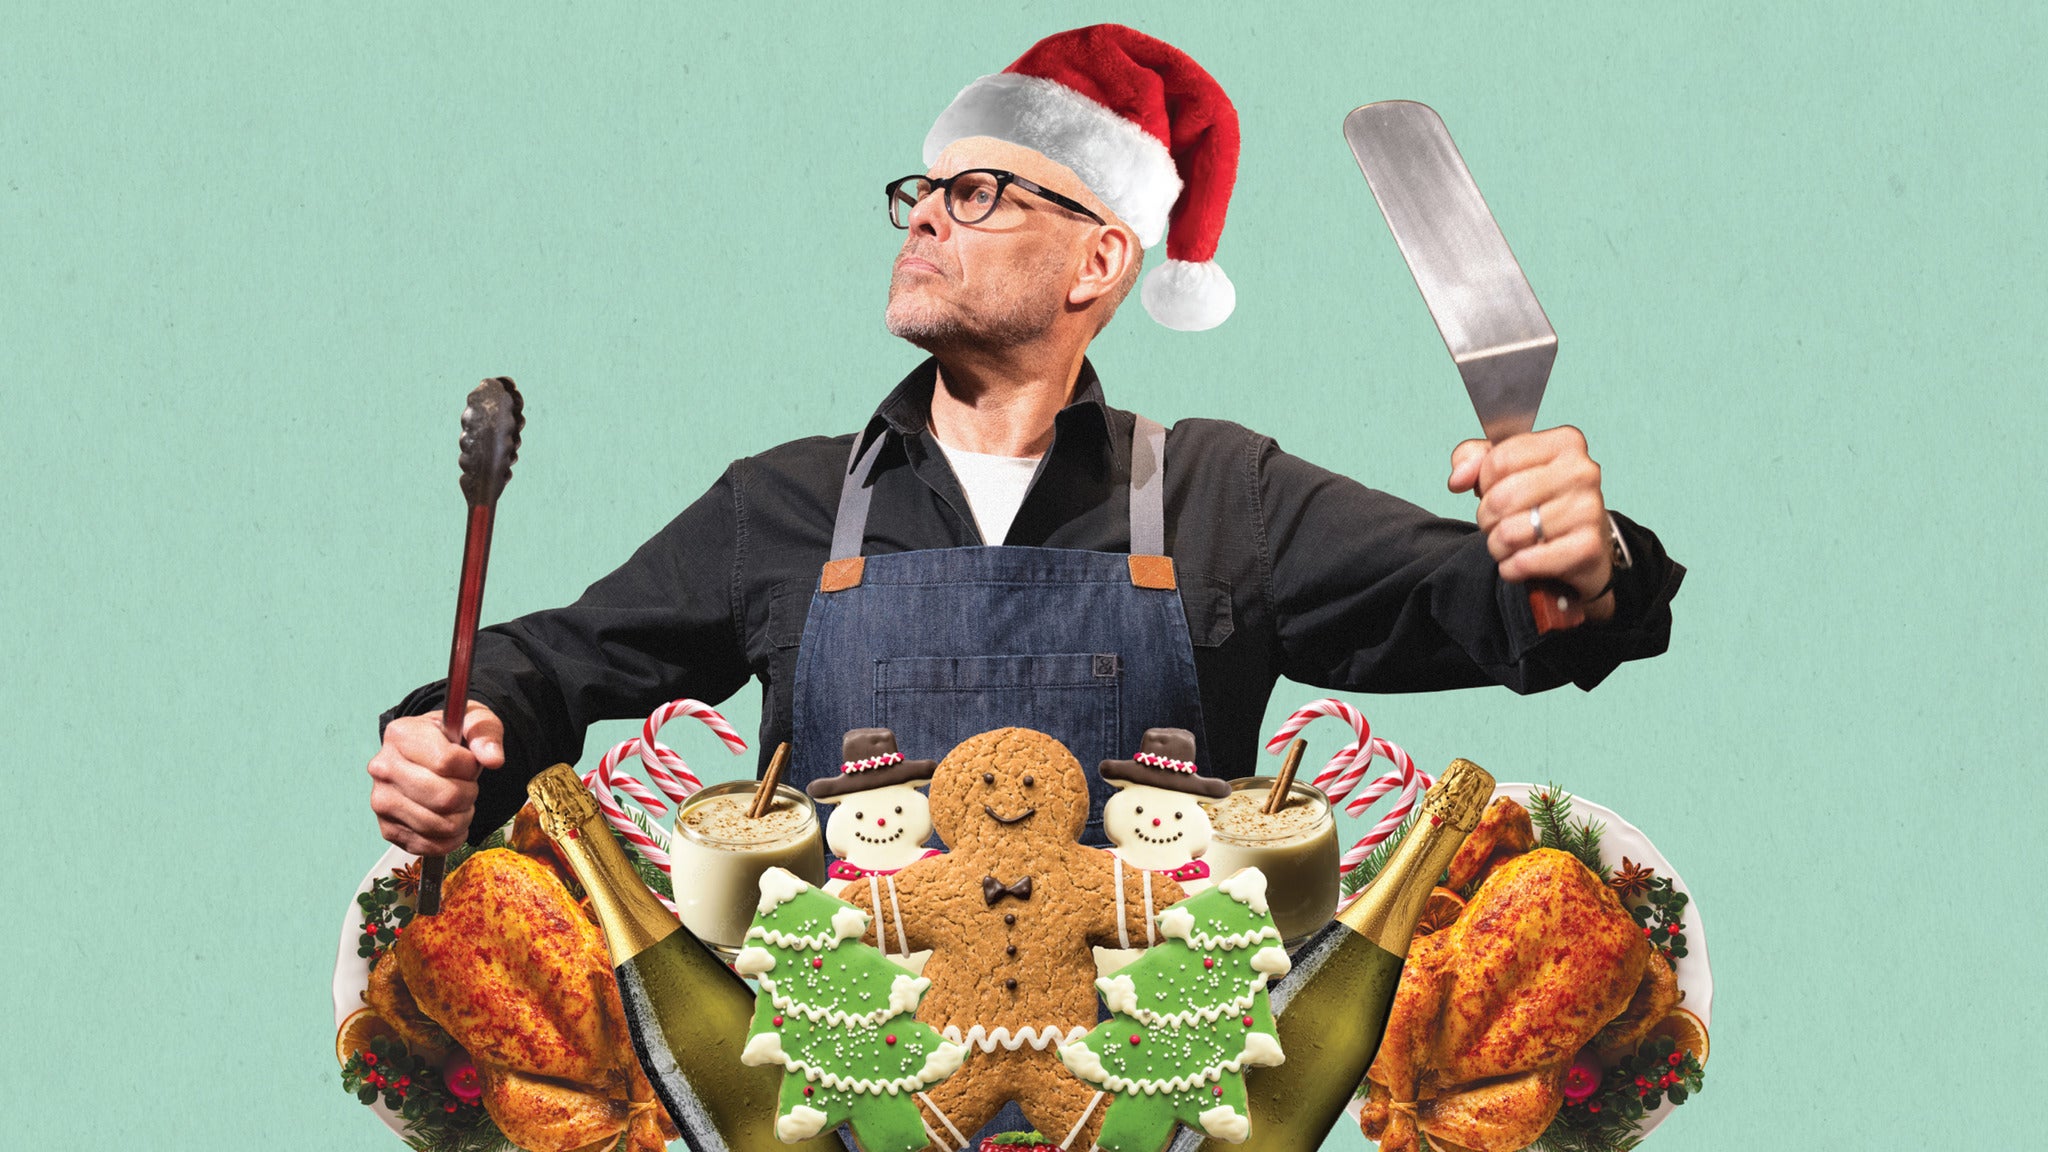 Alton Brown Live: Beyond The Eats - The Holiday Variant